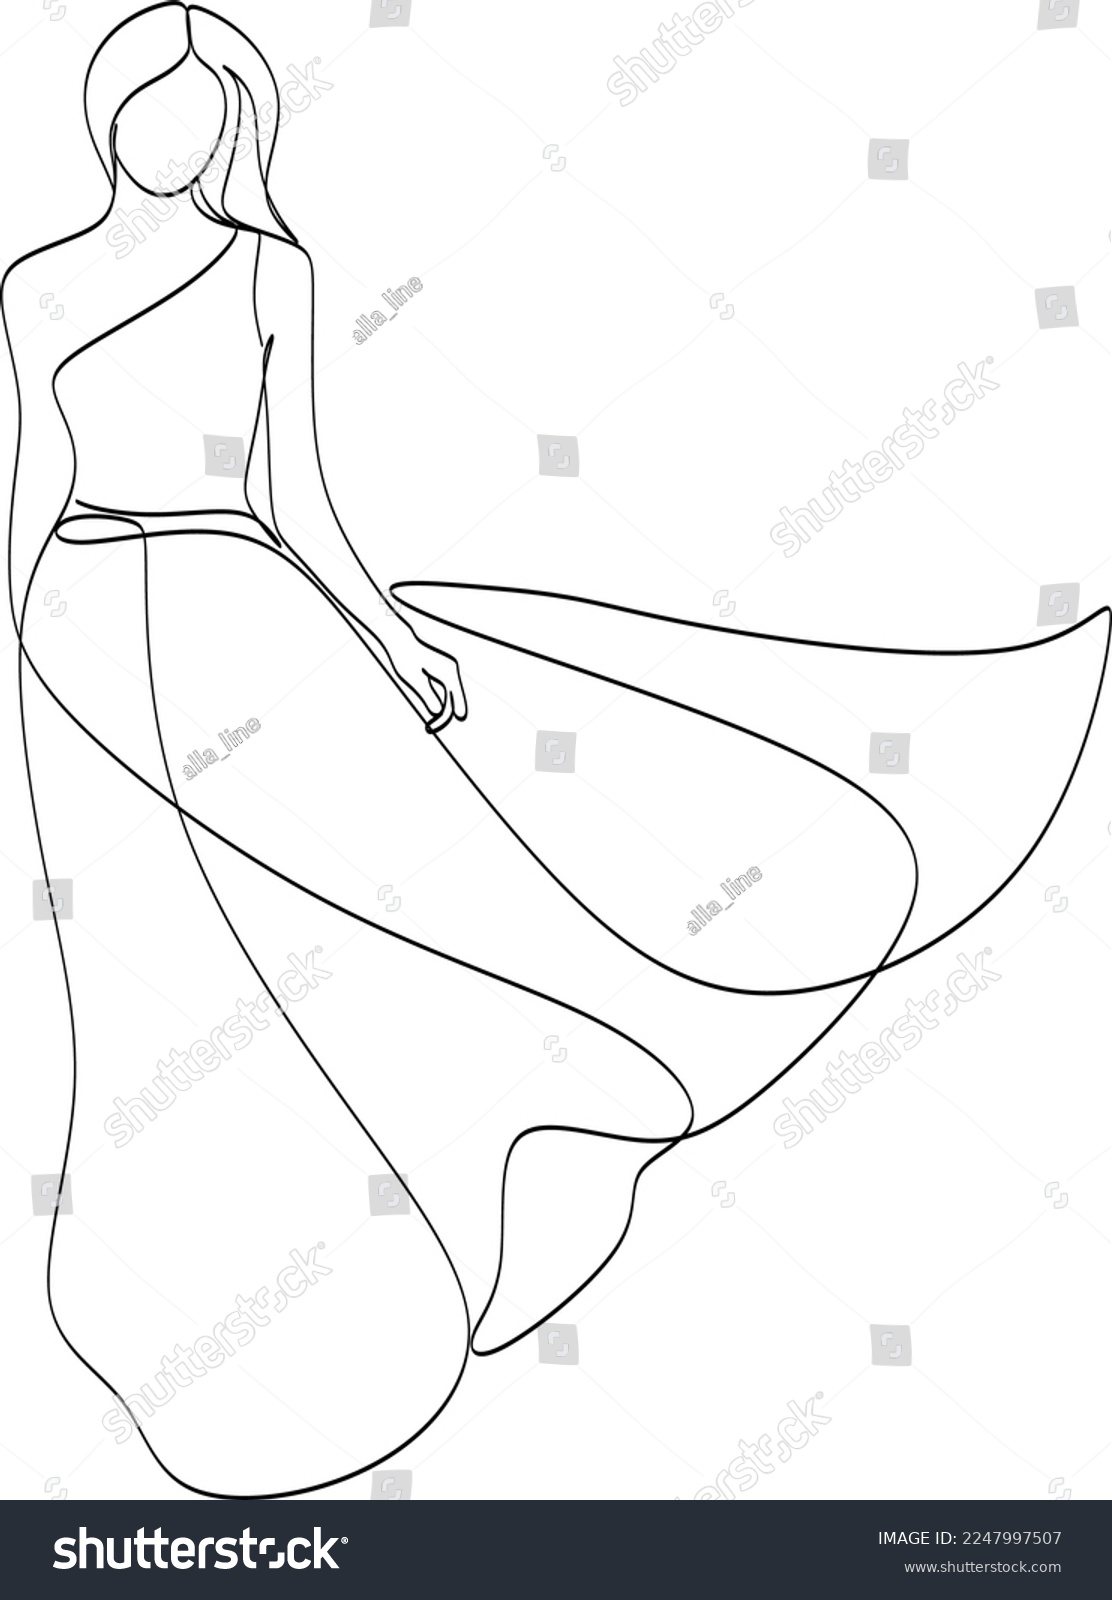 SVG of Beautiful woman in long flowing dress in continuous line art drawing style. Girl wearing luxury evening or bridal gown. Minimalist black linear sketch isolated on white background. Vector illustration svg